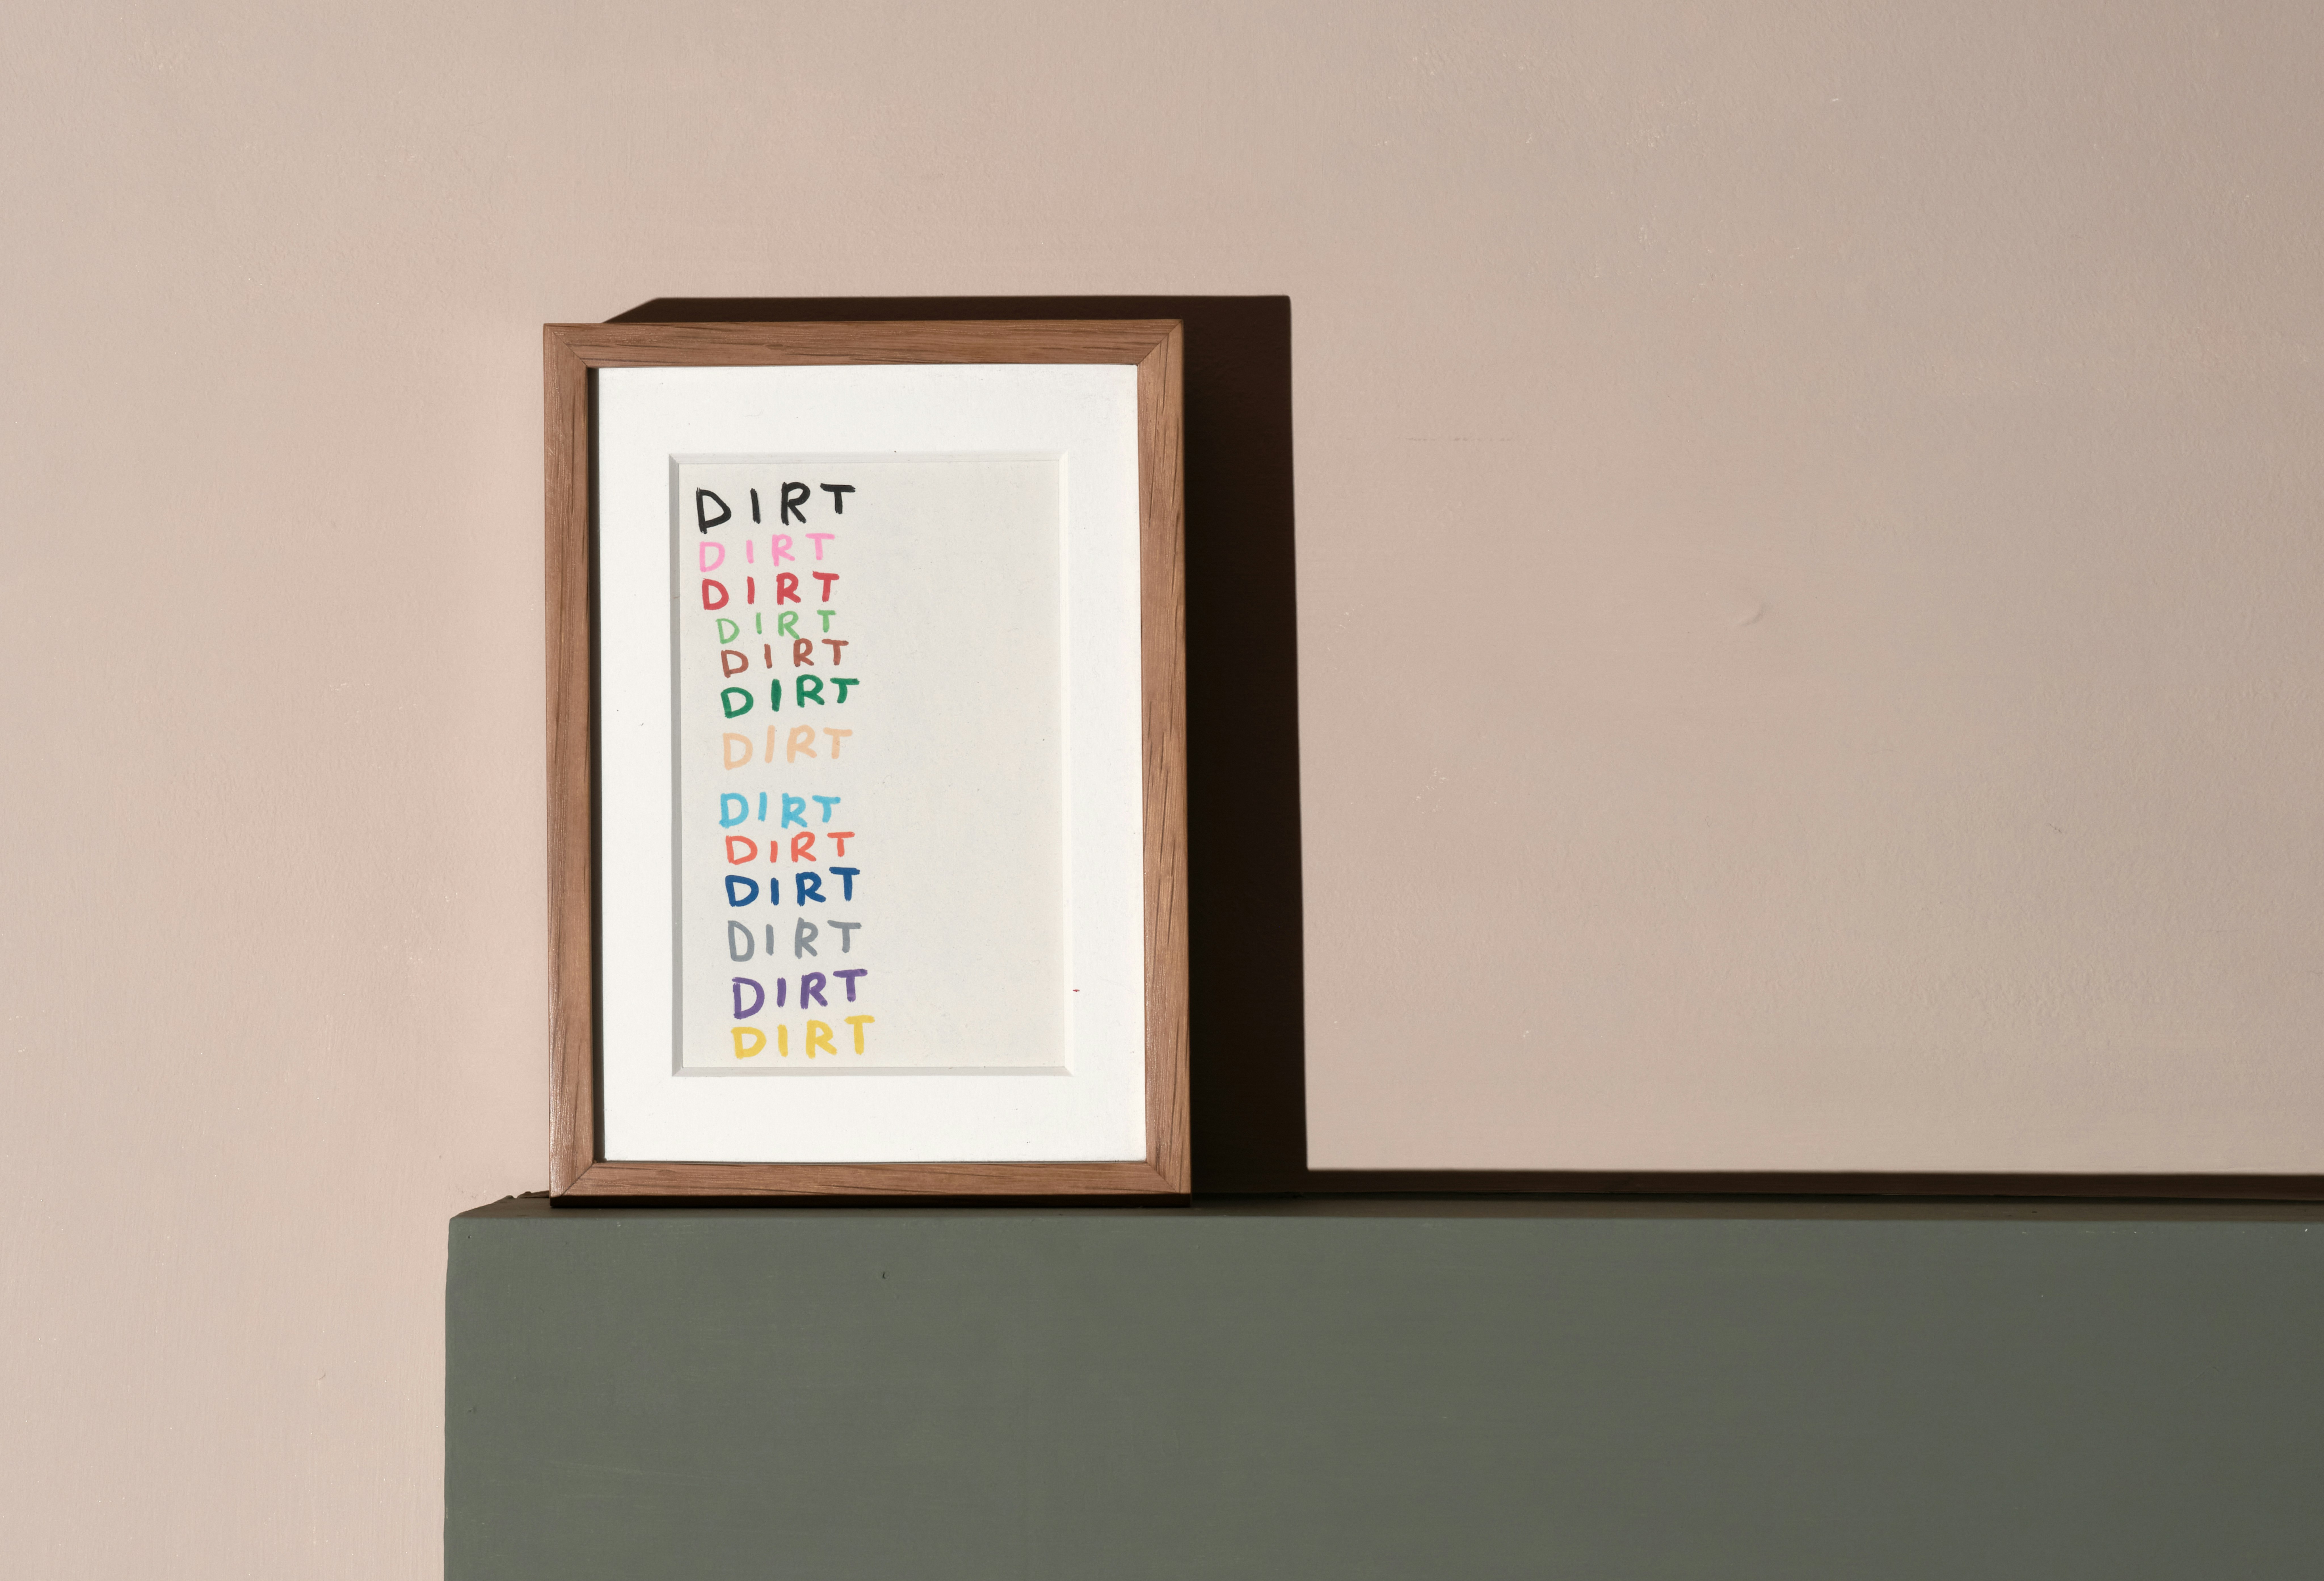 installation photograph of unique drawing in colour felt tip pen by David Shrigley depicting the work dirt in multiple colours